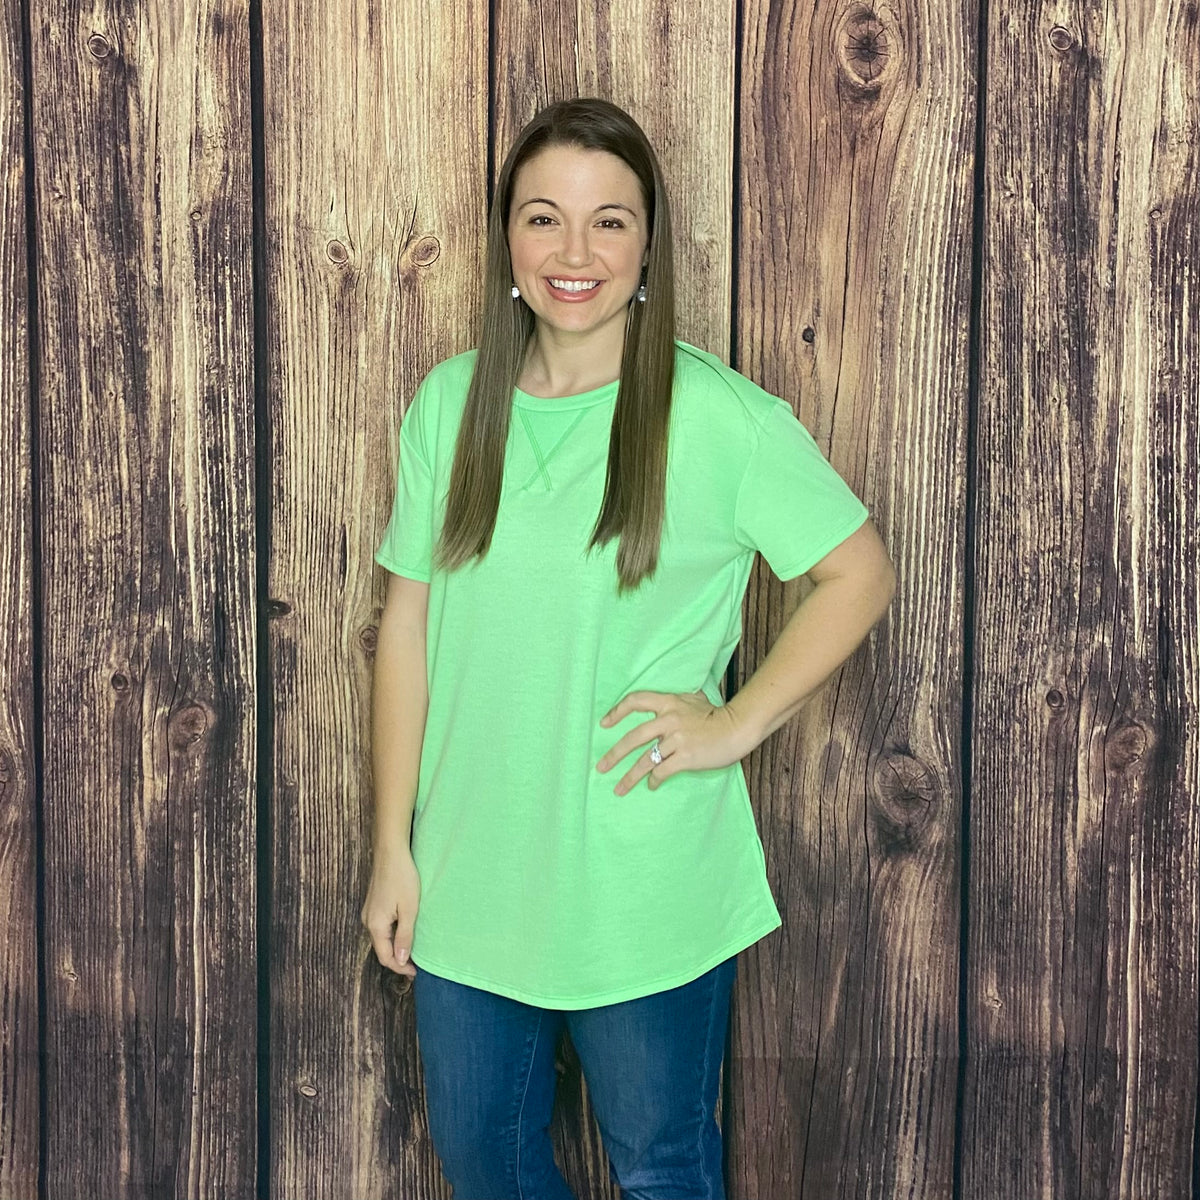 HONEYME NEON (PINK OR LIME) SHORT SLEEVE TOP W/EXPOSED STITCHING